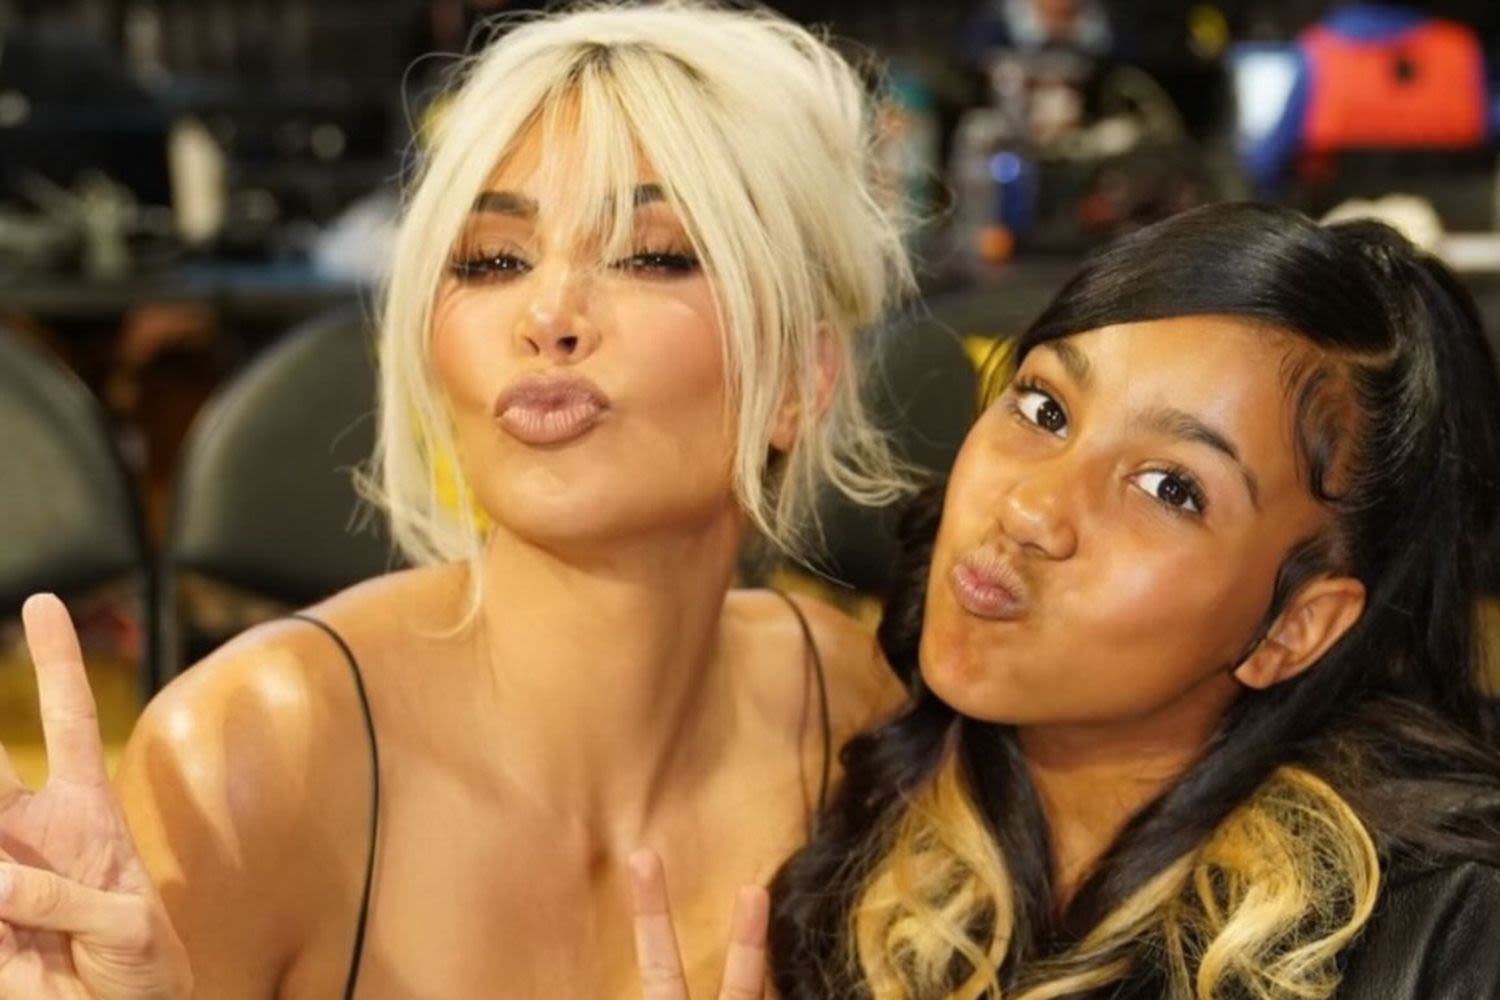 Kim Kardashian’s Daughter North Channels Her Mom’s Blonde Locks with Highlights During 'Fun Night' at WNBA Game